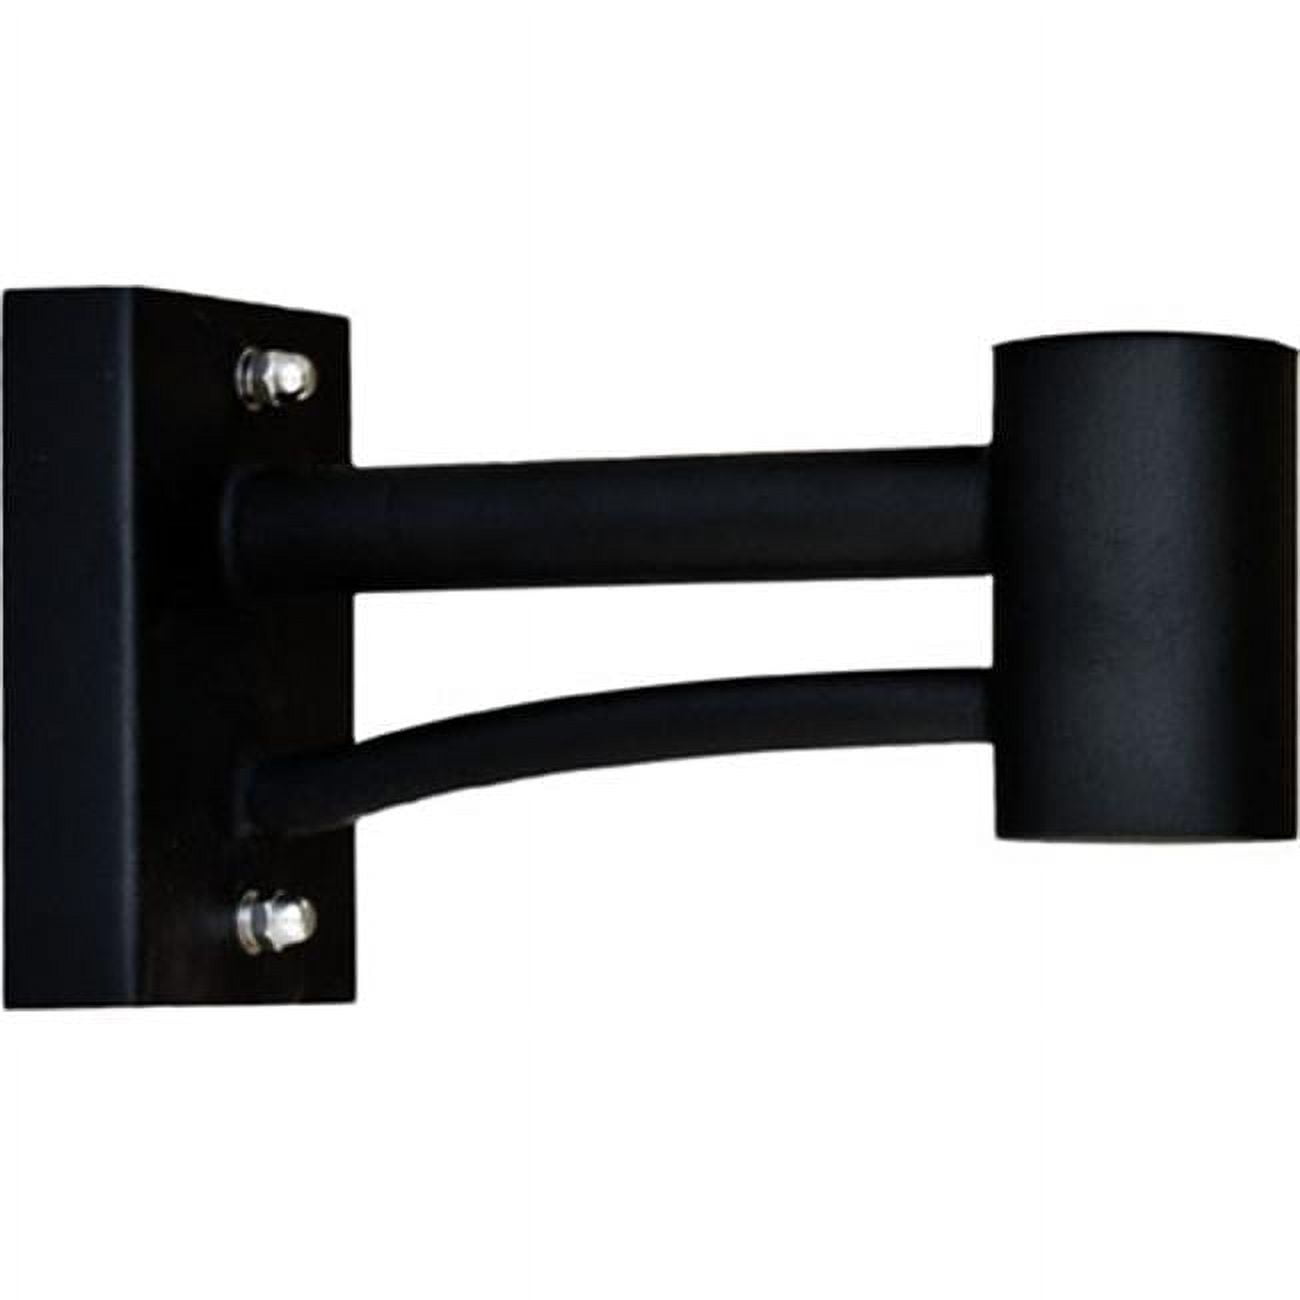 P-arm-gm1-b Wall Mounted Arm For Small & Medium Gm Post Top Fixture, Black